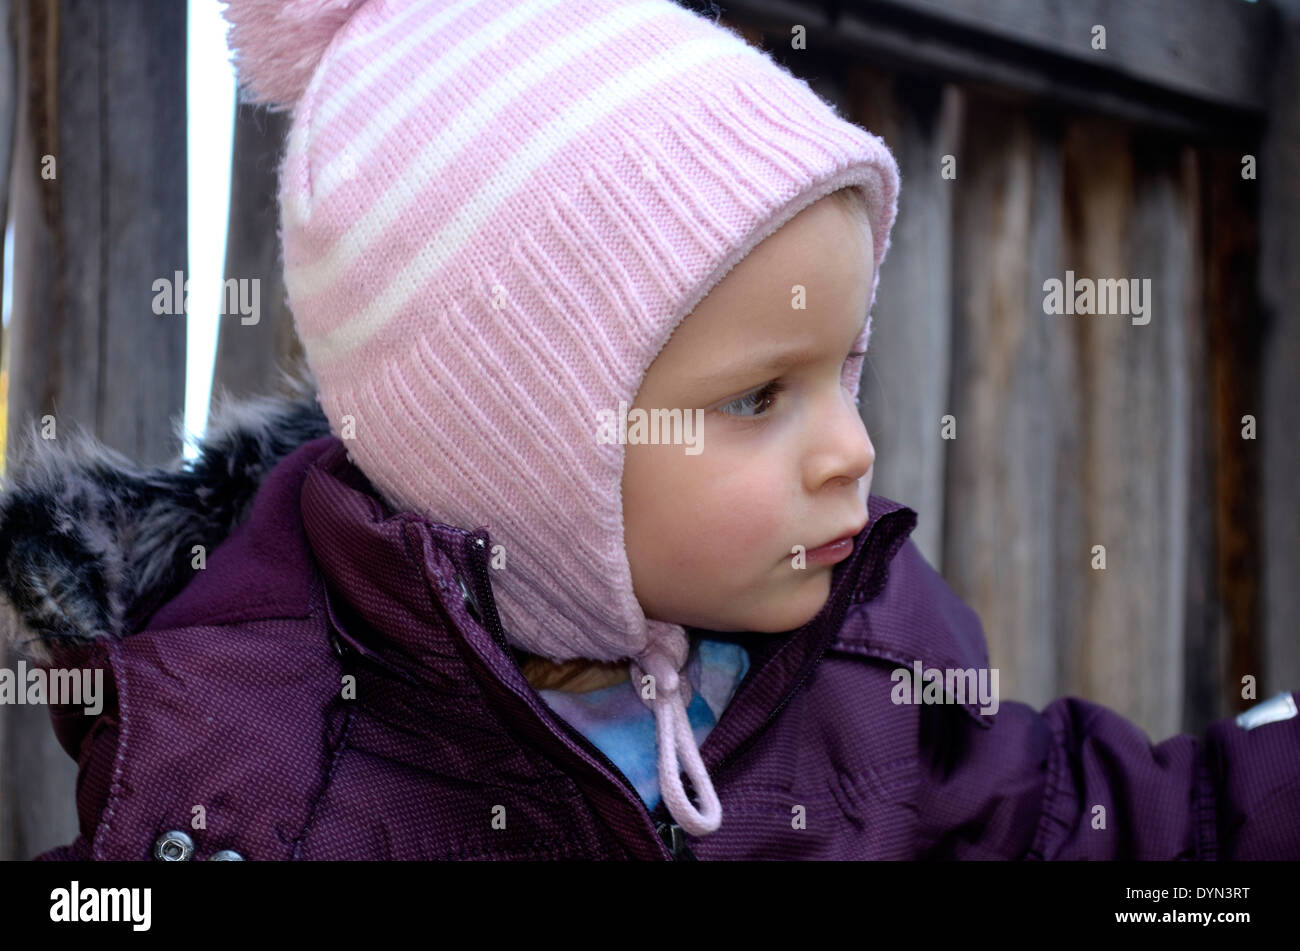 Little girl profile in pink hat with ear flaps Stock Photo